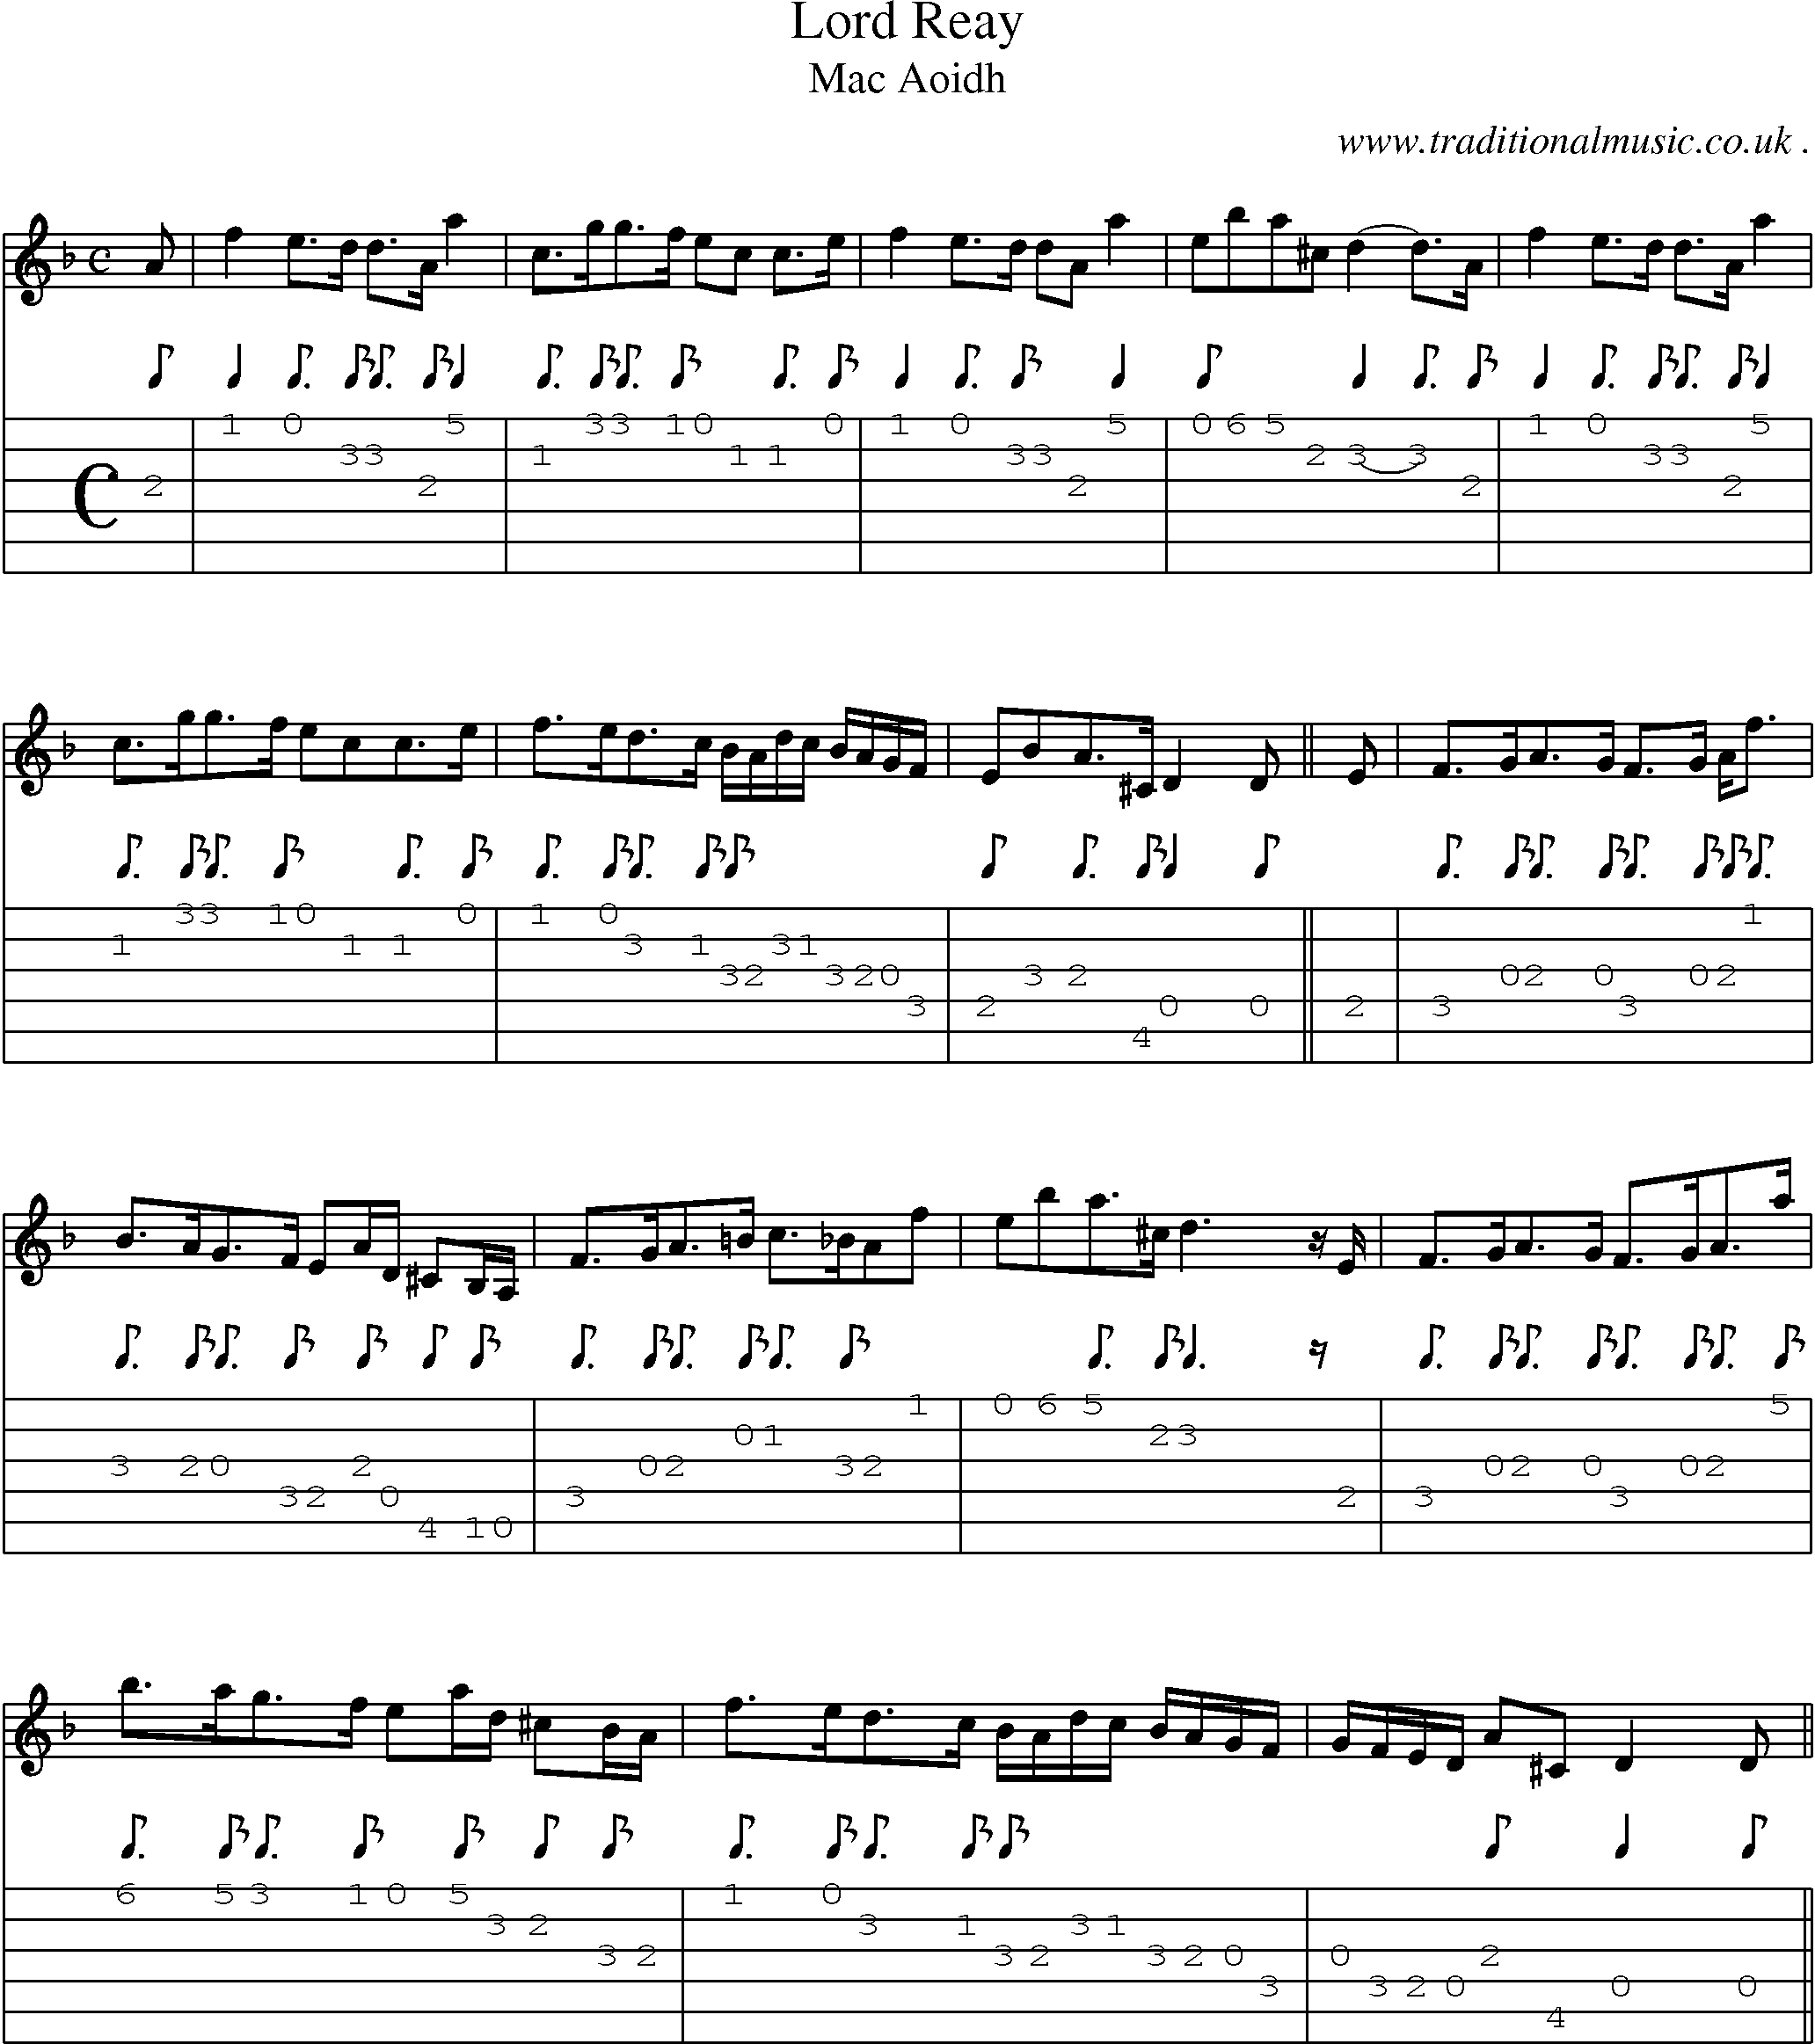 Sheet-music  score, Chords and Guitar Tabs for Lord Reay